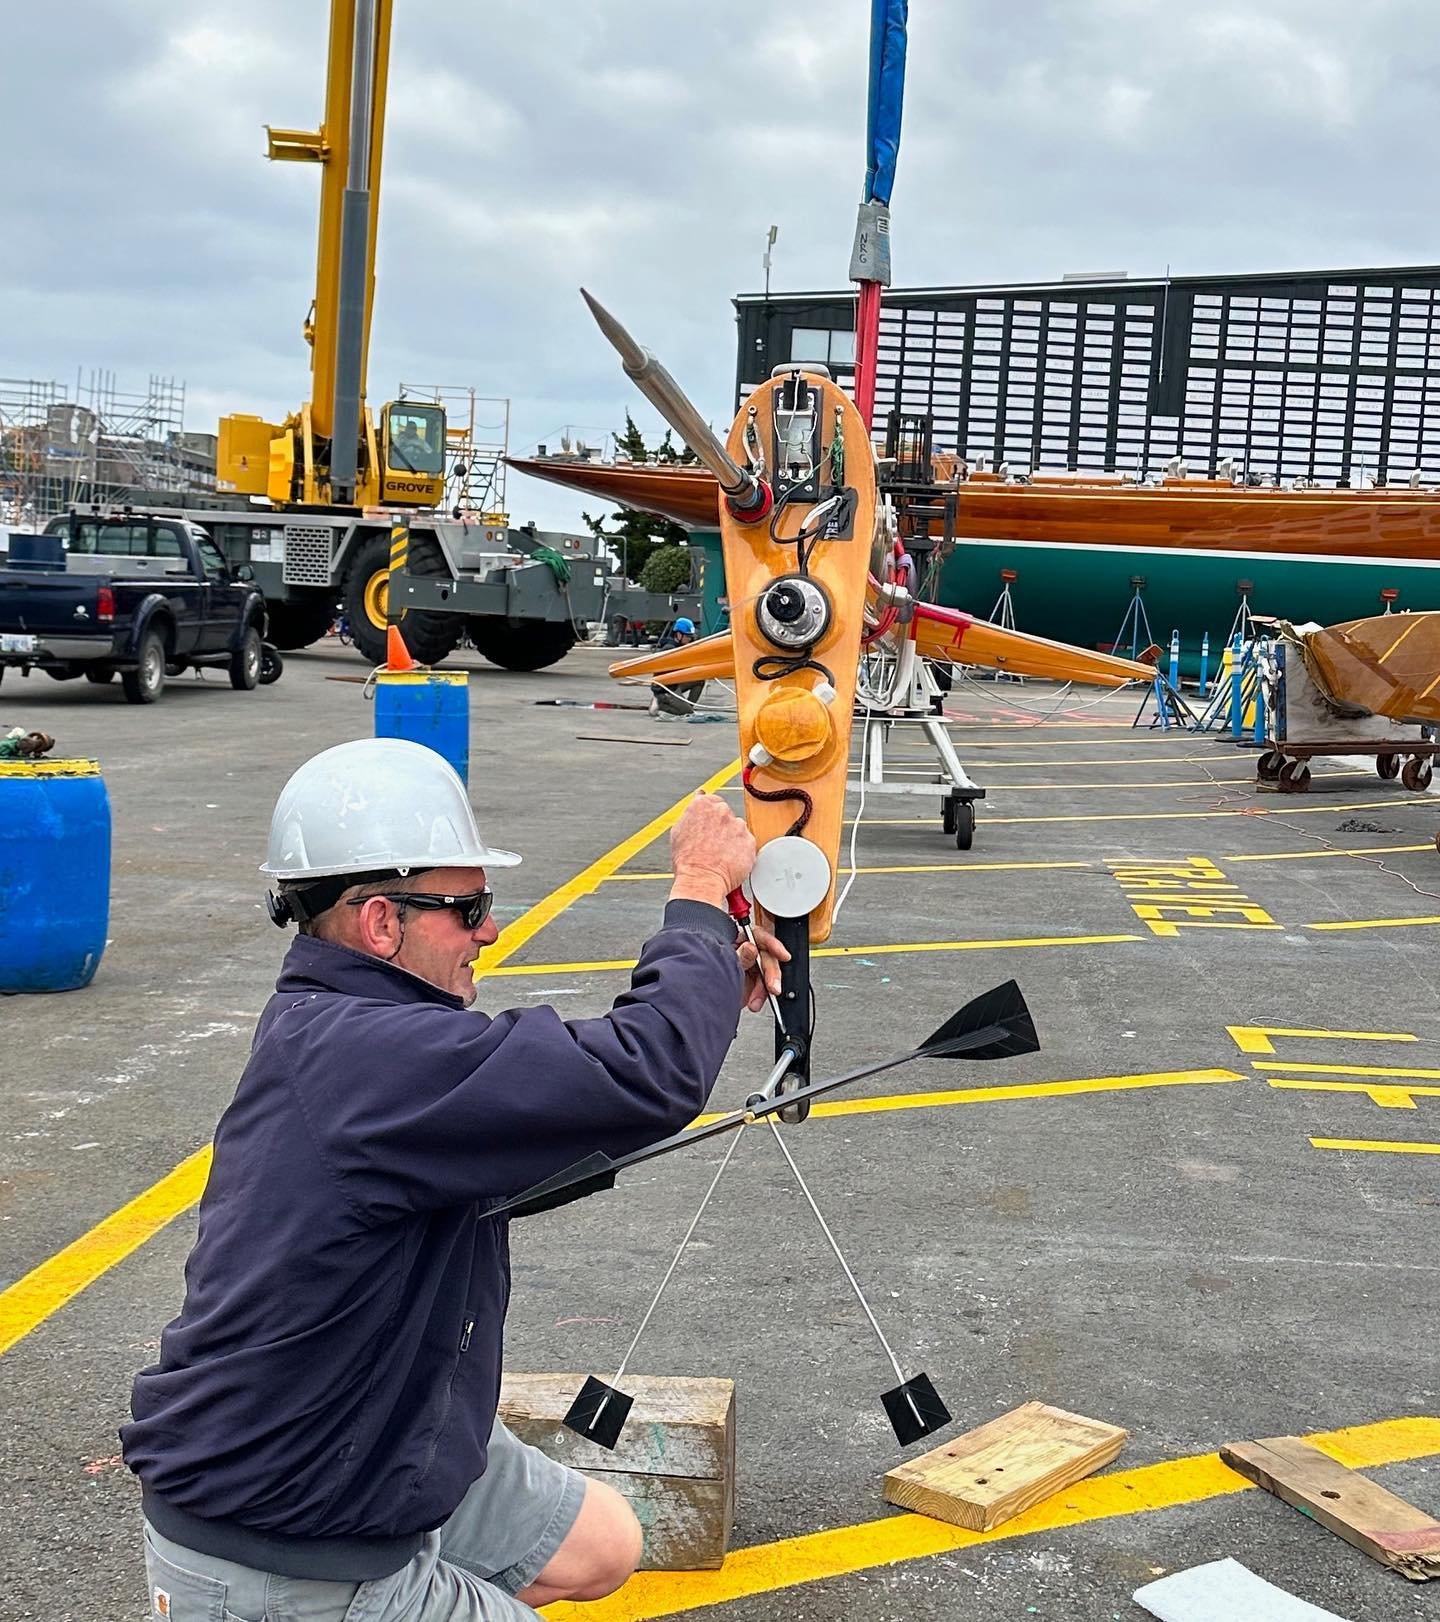 Perfect day to step the mast on the 91&rsquo; sloop Sophie at Safe Harbor Newport Shipyard. Carbon spars beautifully painted to look like wood. 🏗️ ⛵️ ⚓️ 
.
.
.
.
.
.
.
#masts  #newportrigginggroup
#rigginglife 
#Newportshipyard
#safeharbornewportshi